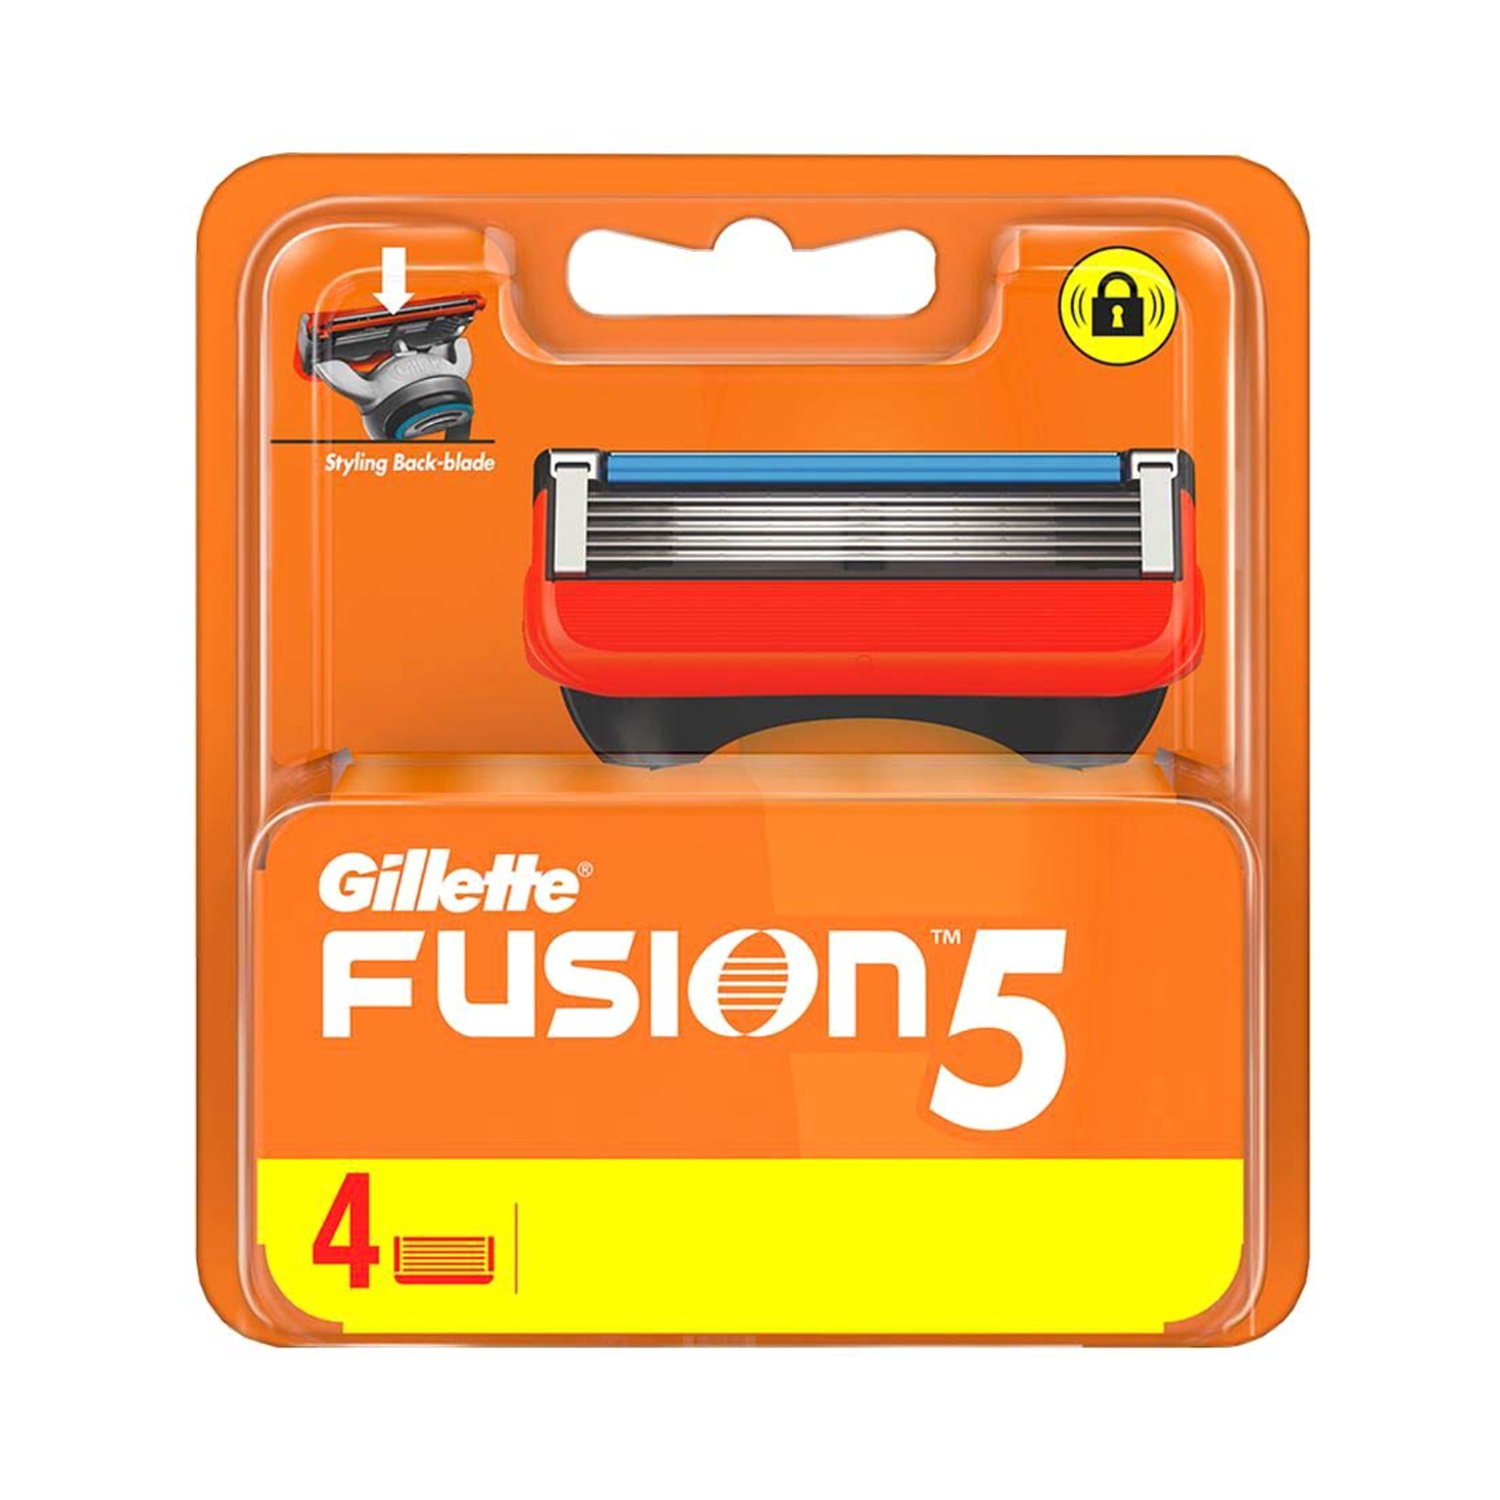 Gillette | Gillette Fusion Manual Blades for Perfect Shave and Perfect Beard Shape (4Pcs)